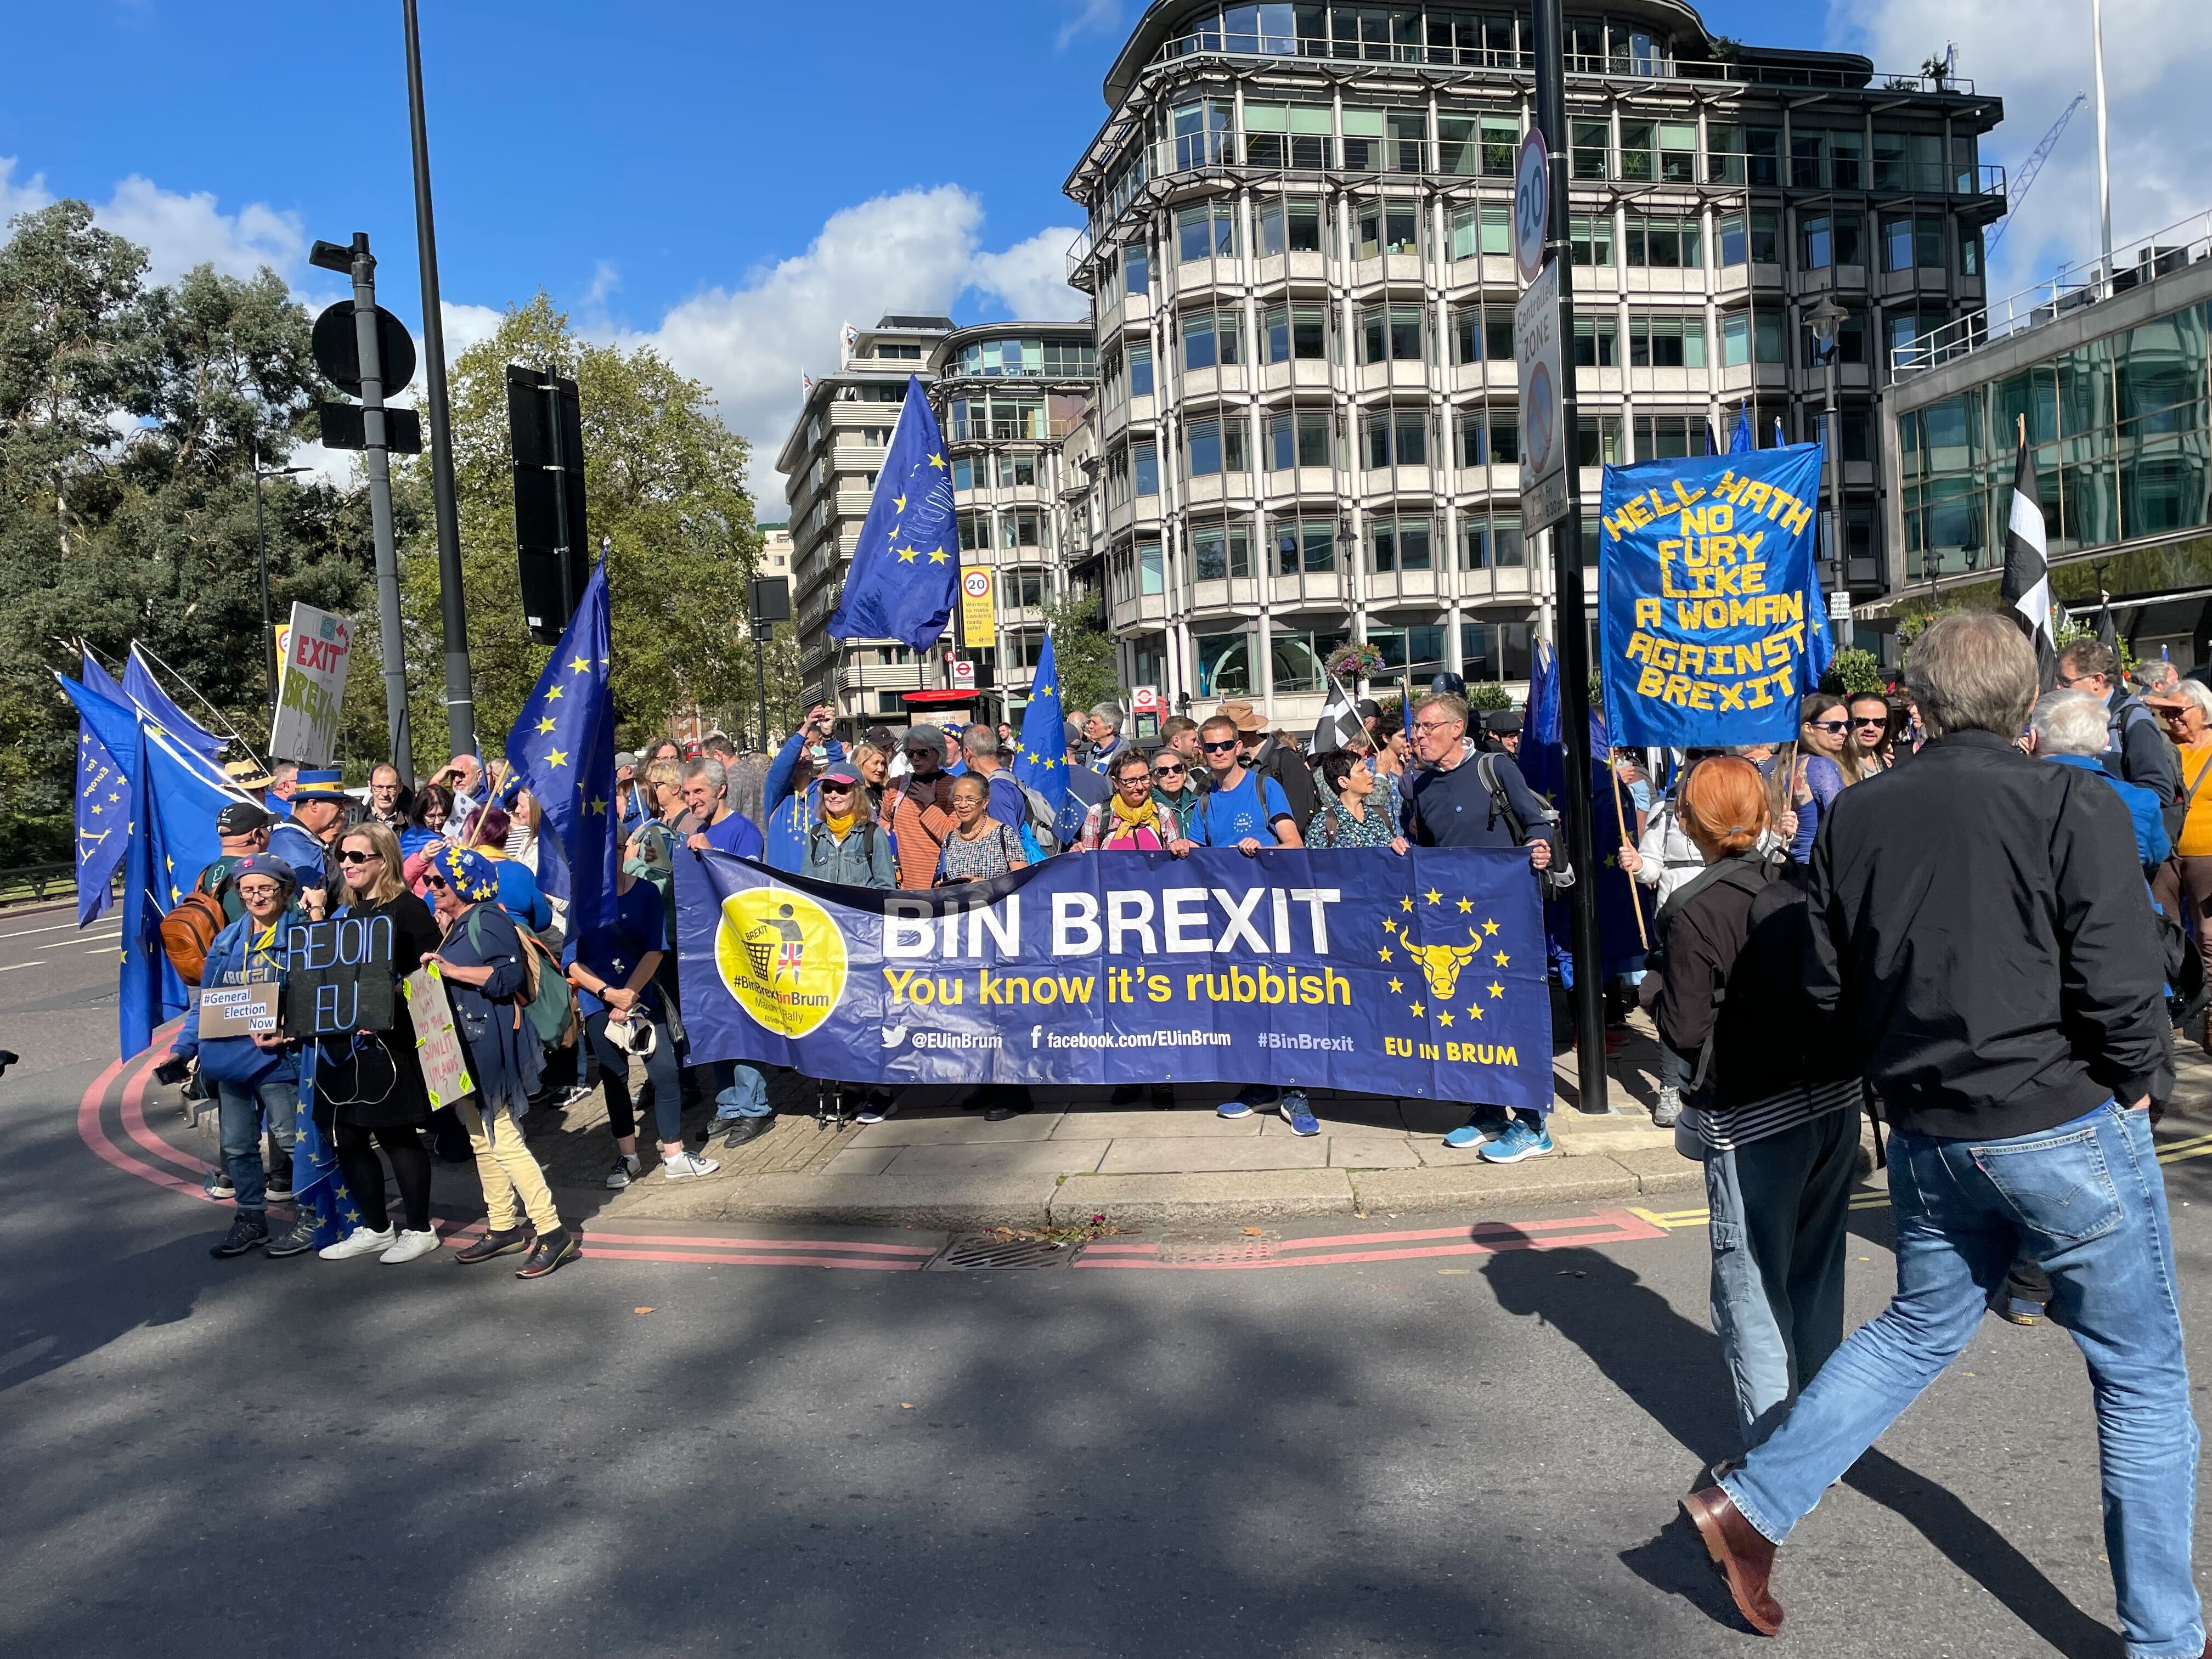 Hundreds of people joined the second National Rejoin March in London on September 23